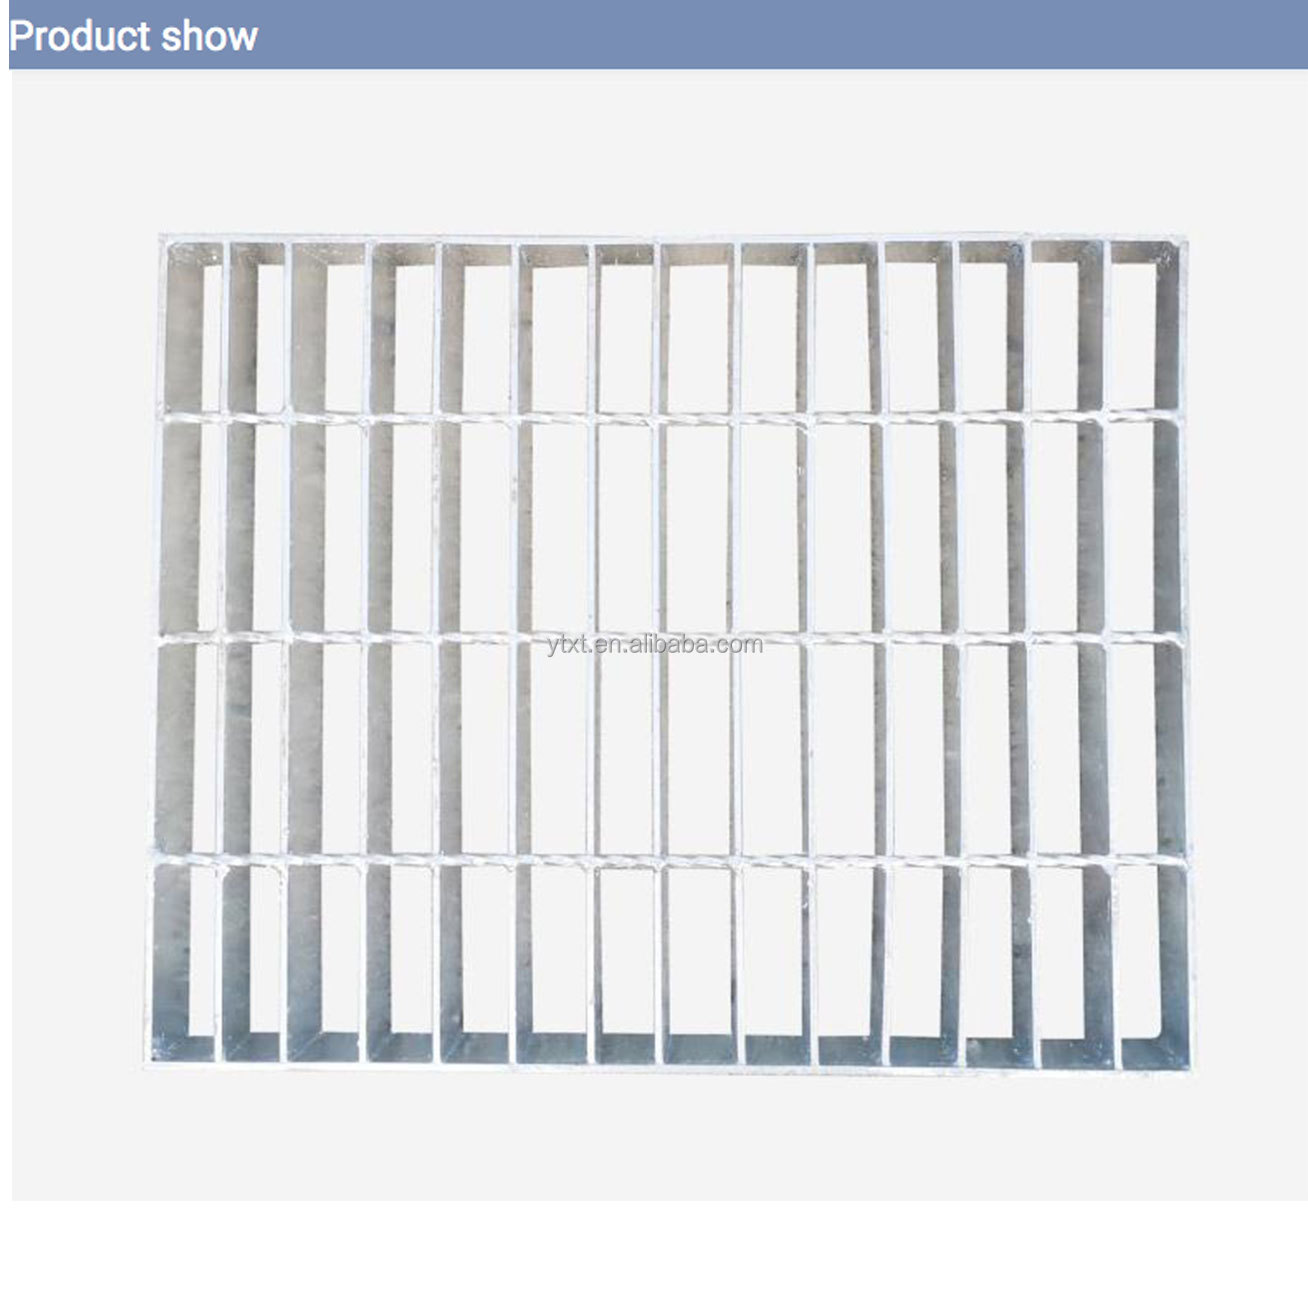 30x30 30x3mm Ss Trench Grating Metal Plates For Driveways